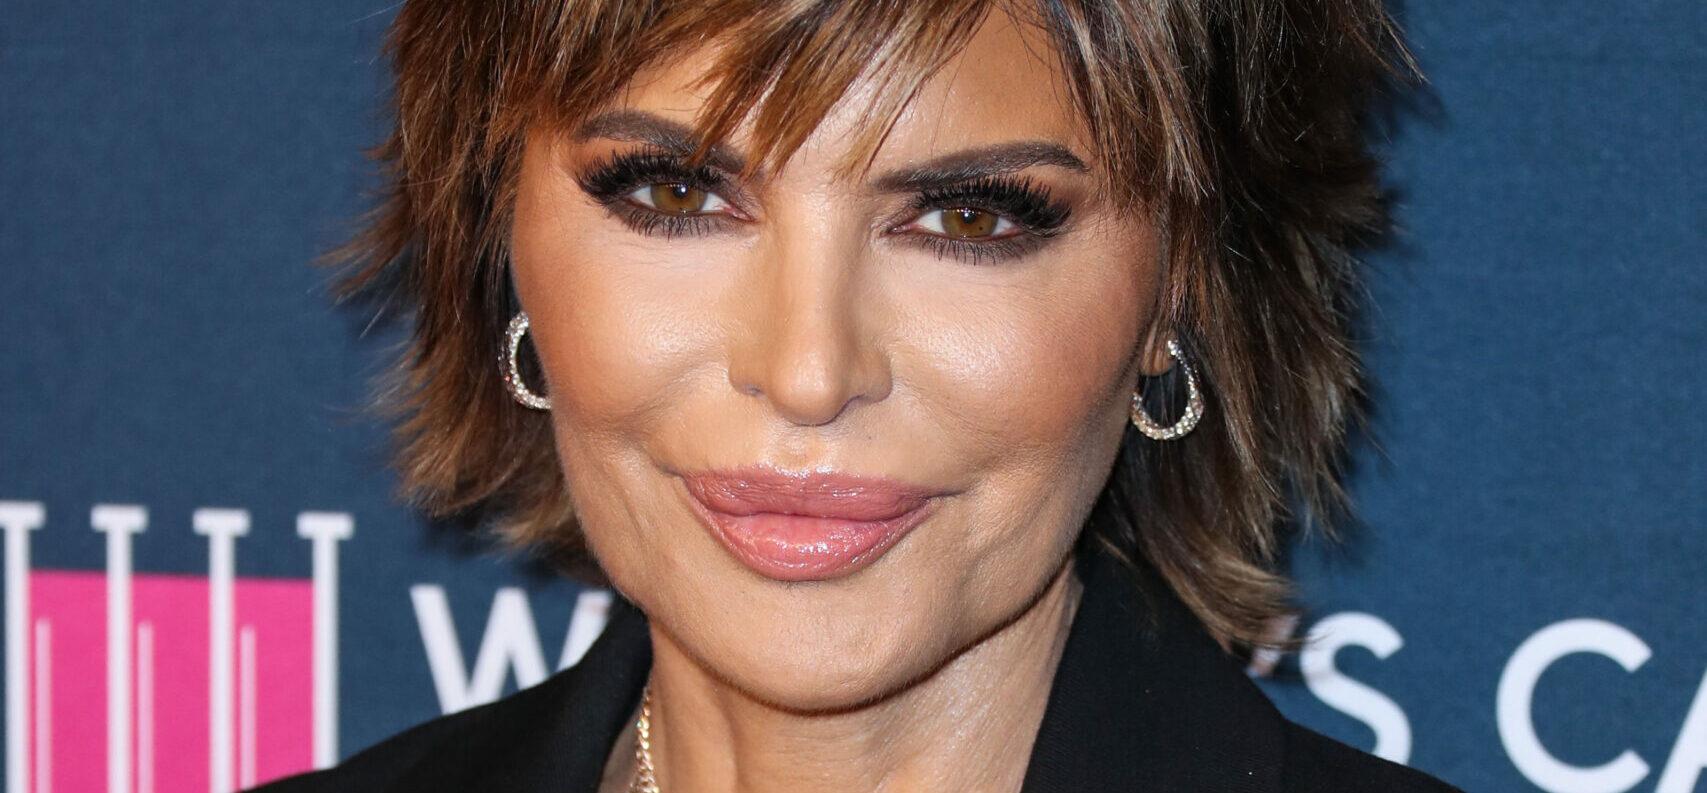 ‘RHOBH’ Star Lisa Rinna’s Supporter Wants Her To ‘Never Change’